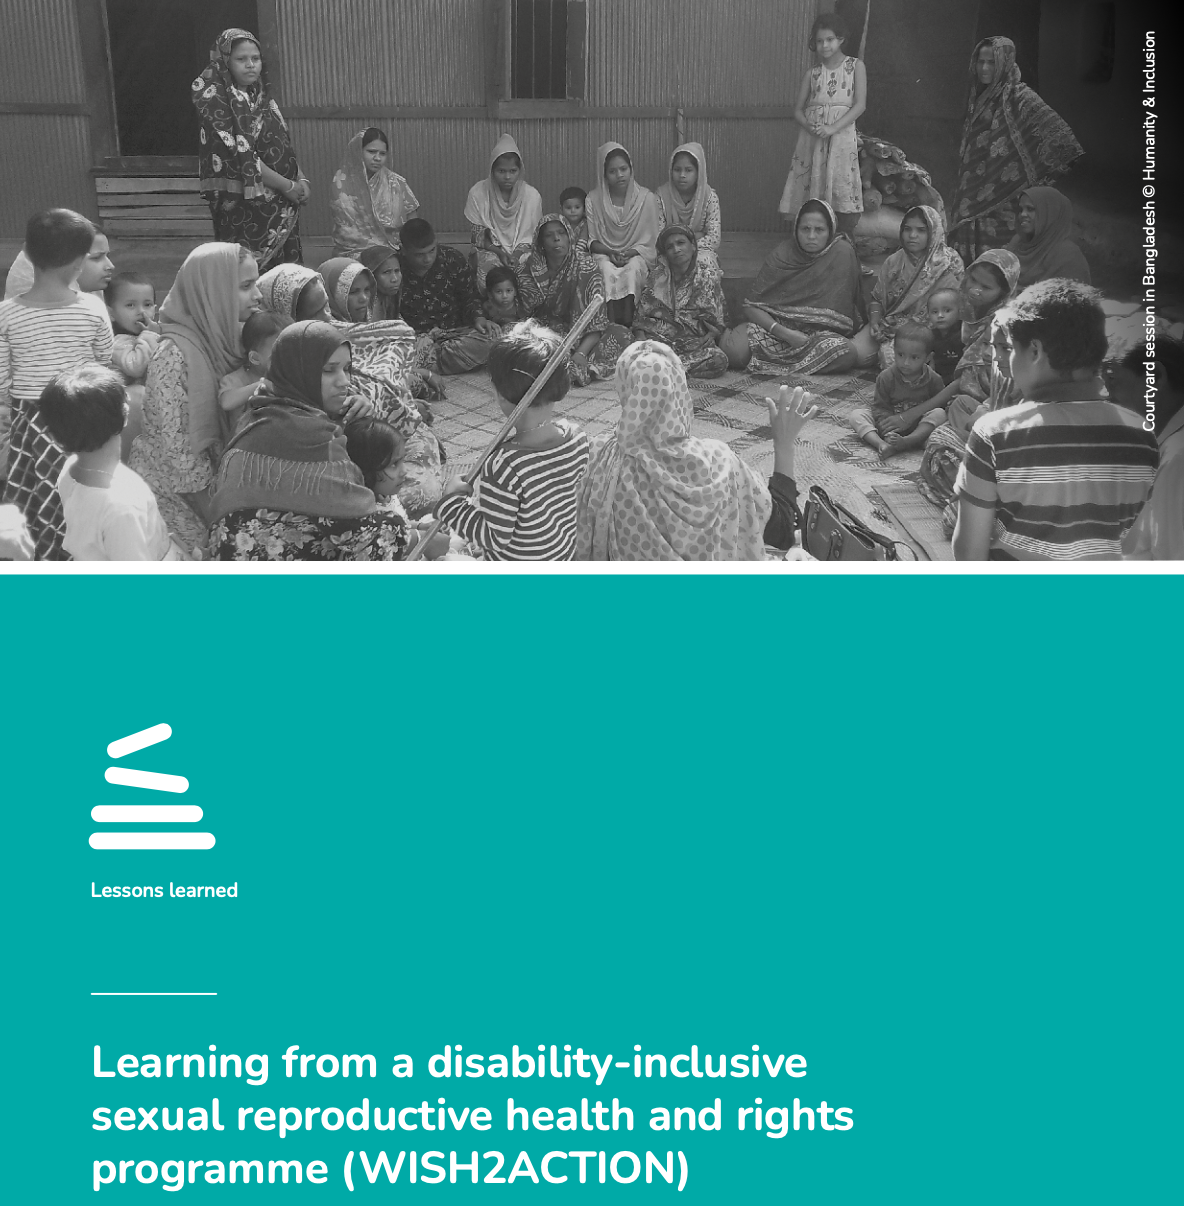 Learning from a disability-inclusive SRHR programme (WISH2ACTION)